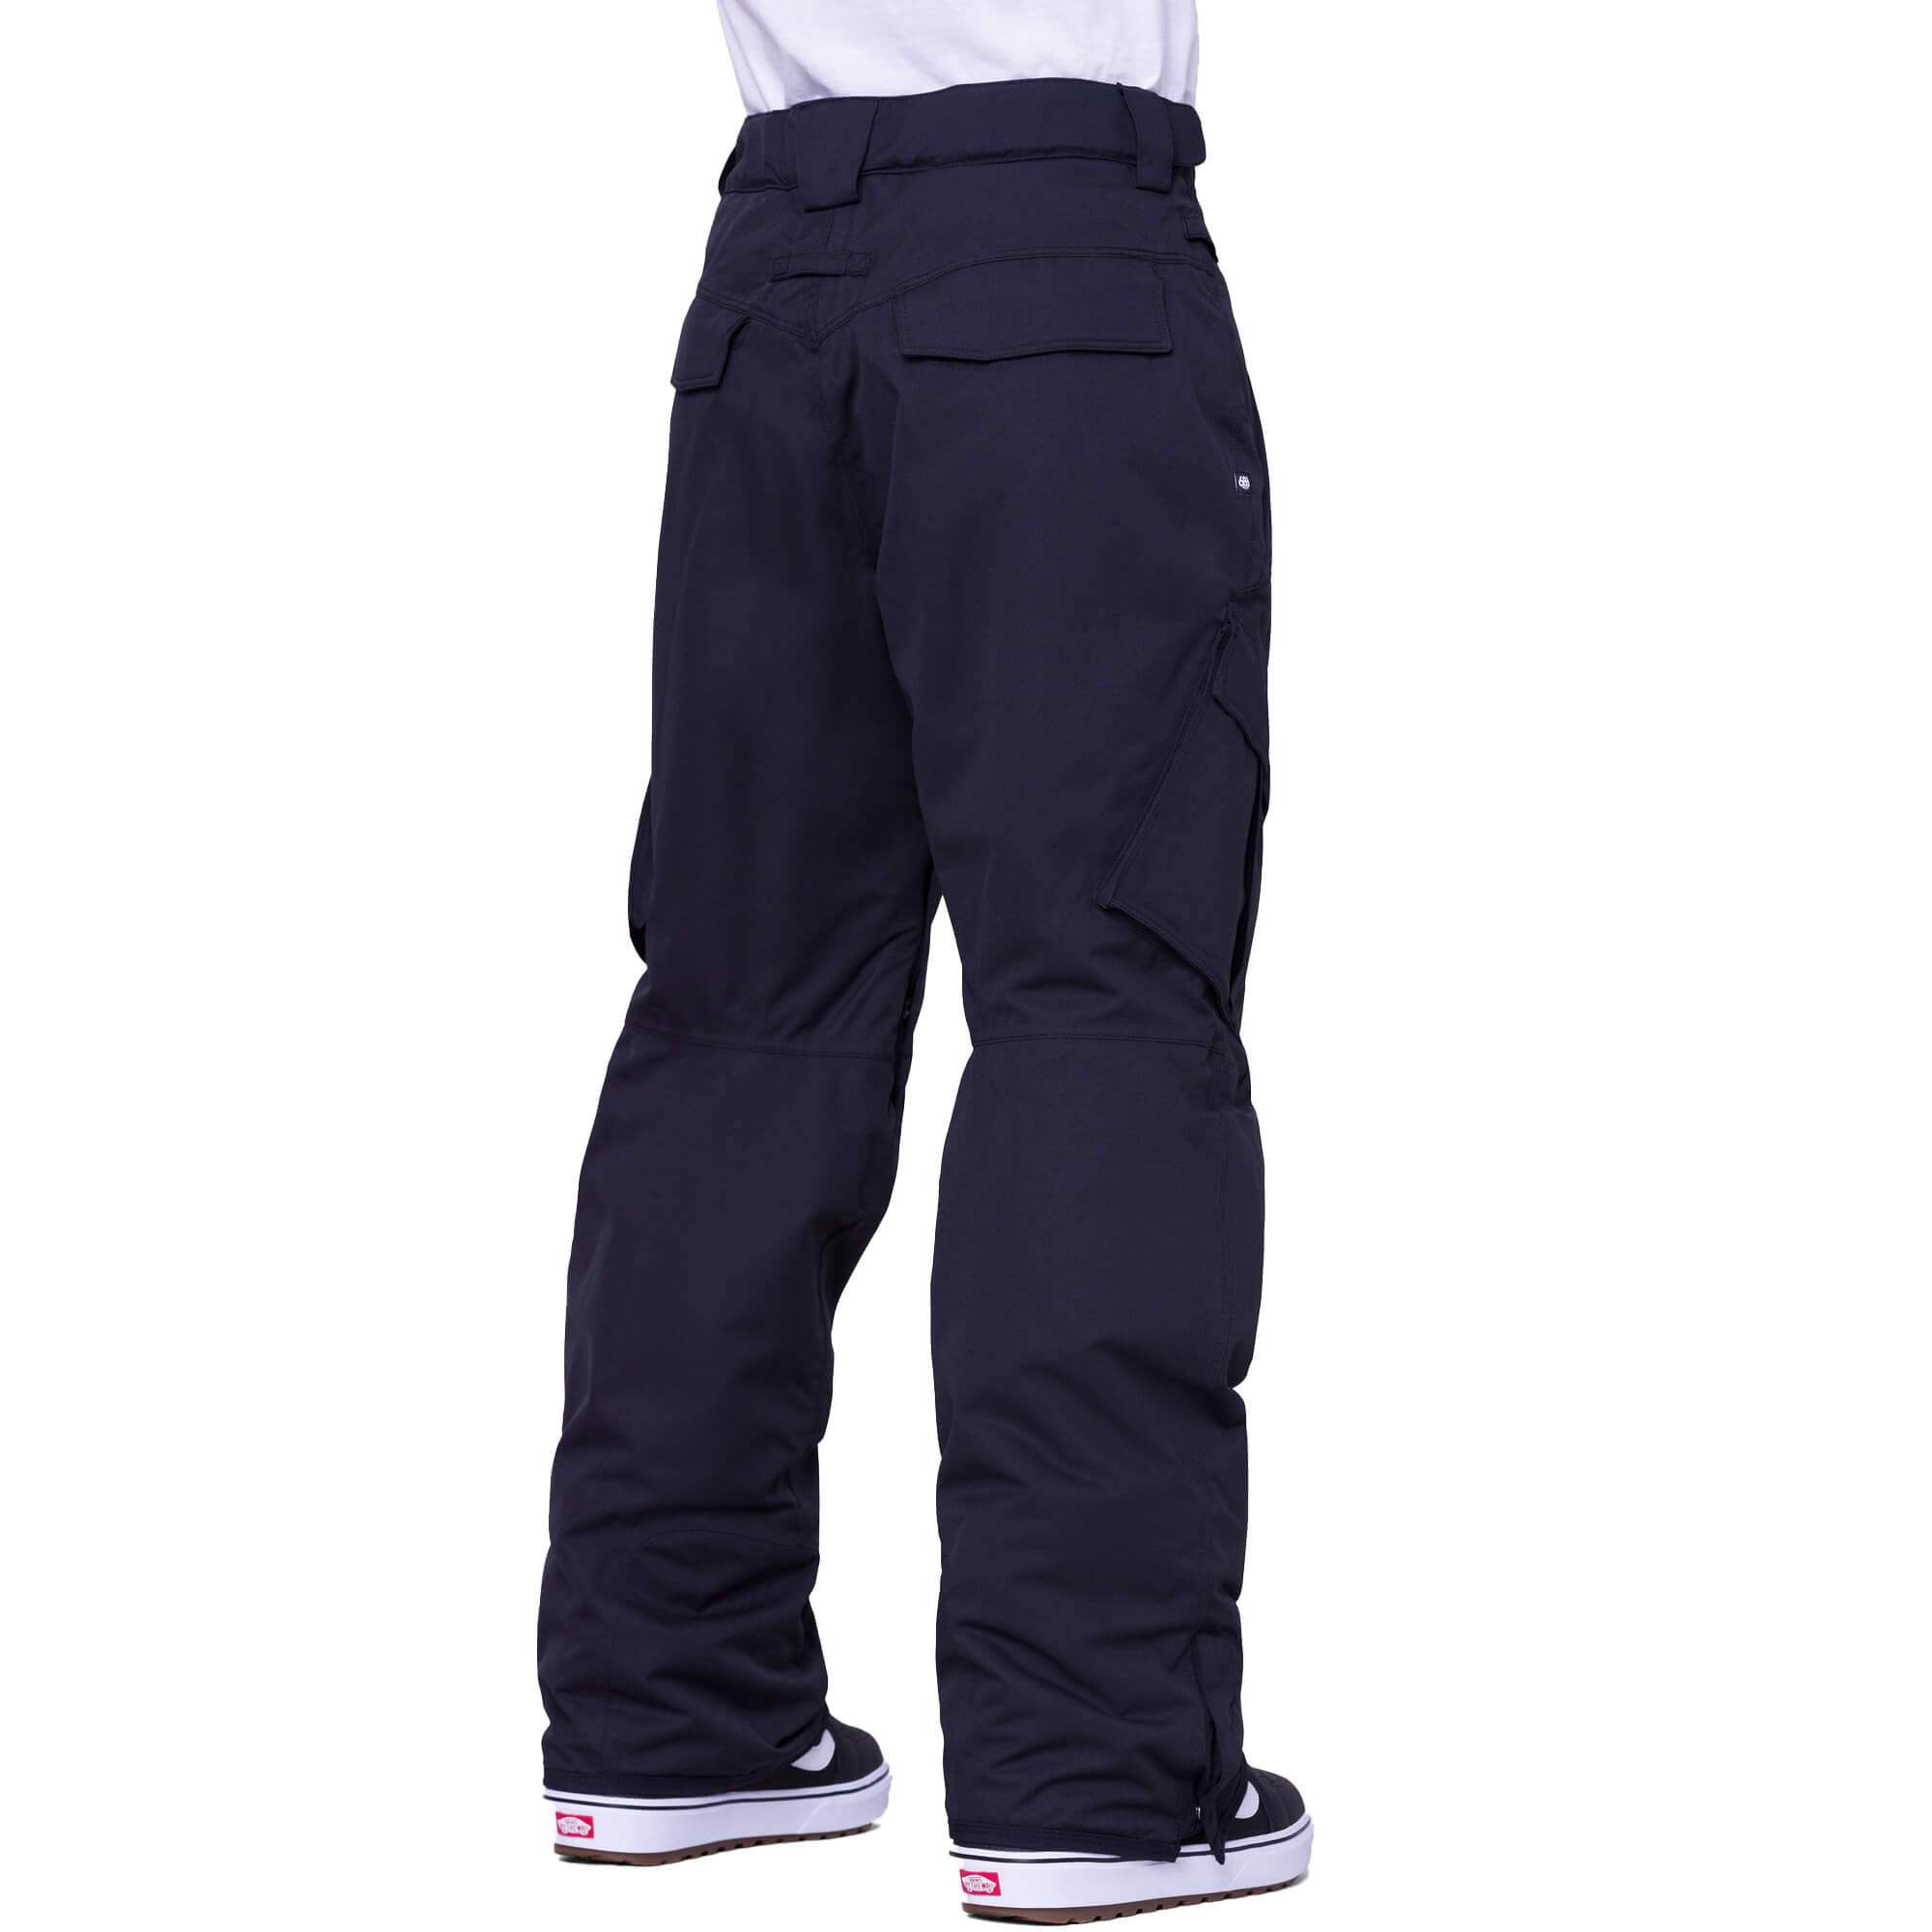 686 Infinity Cargo Pants Insulated Snowboard/Ski Trousers